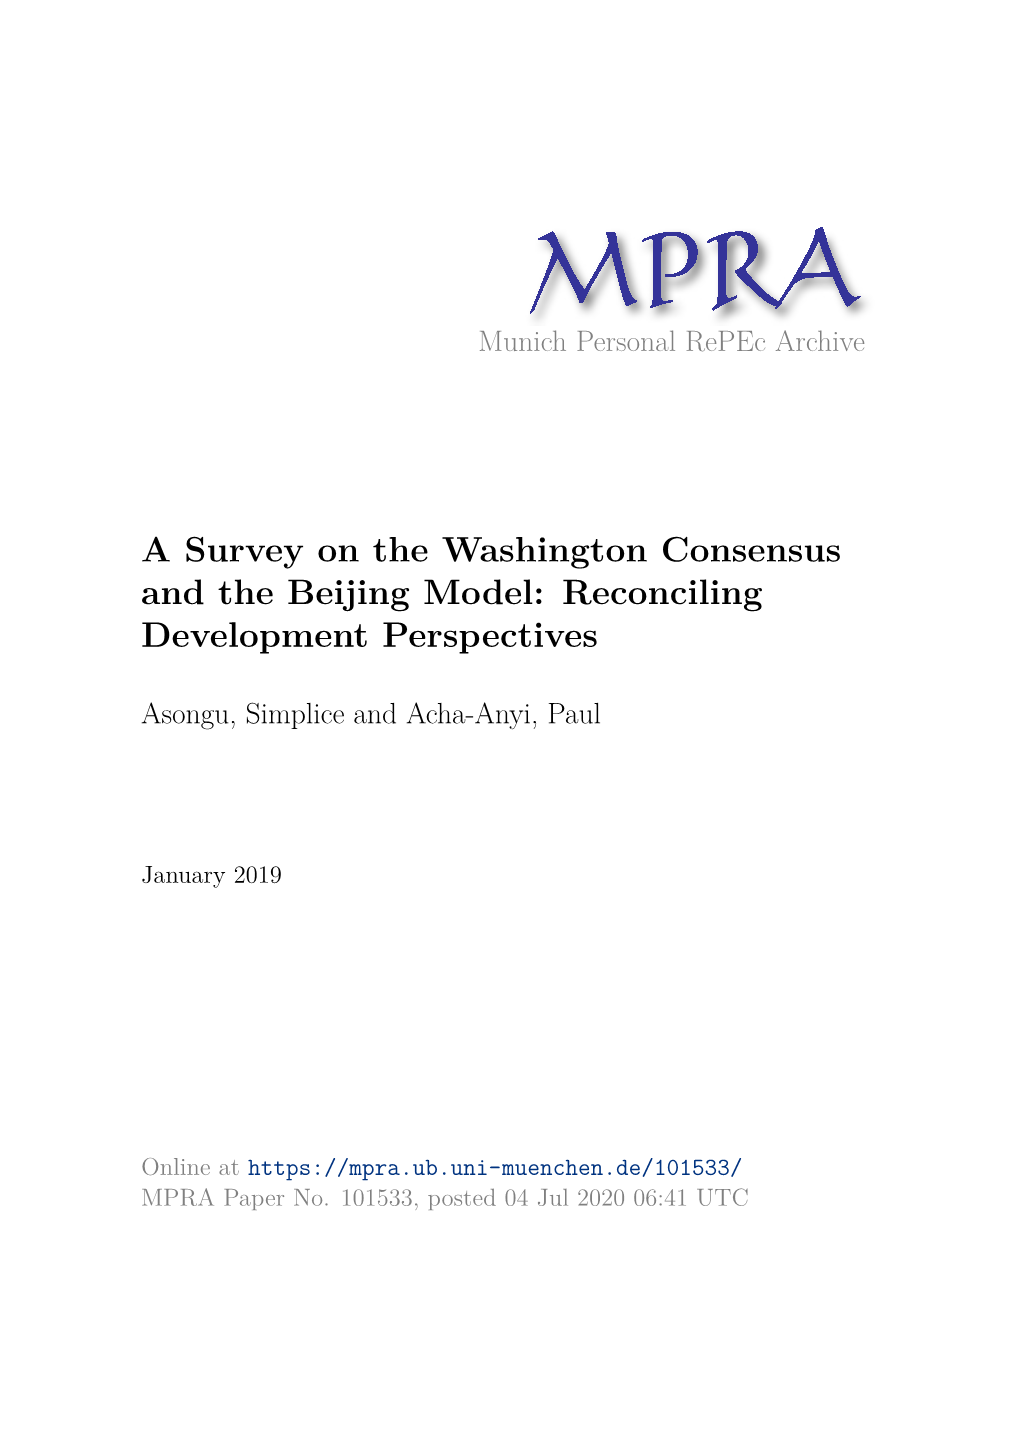 A Survey on the Washington Consensus and the Beijing Model: Reconciling Development Perspectives